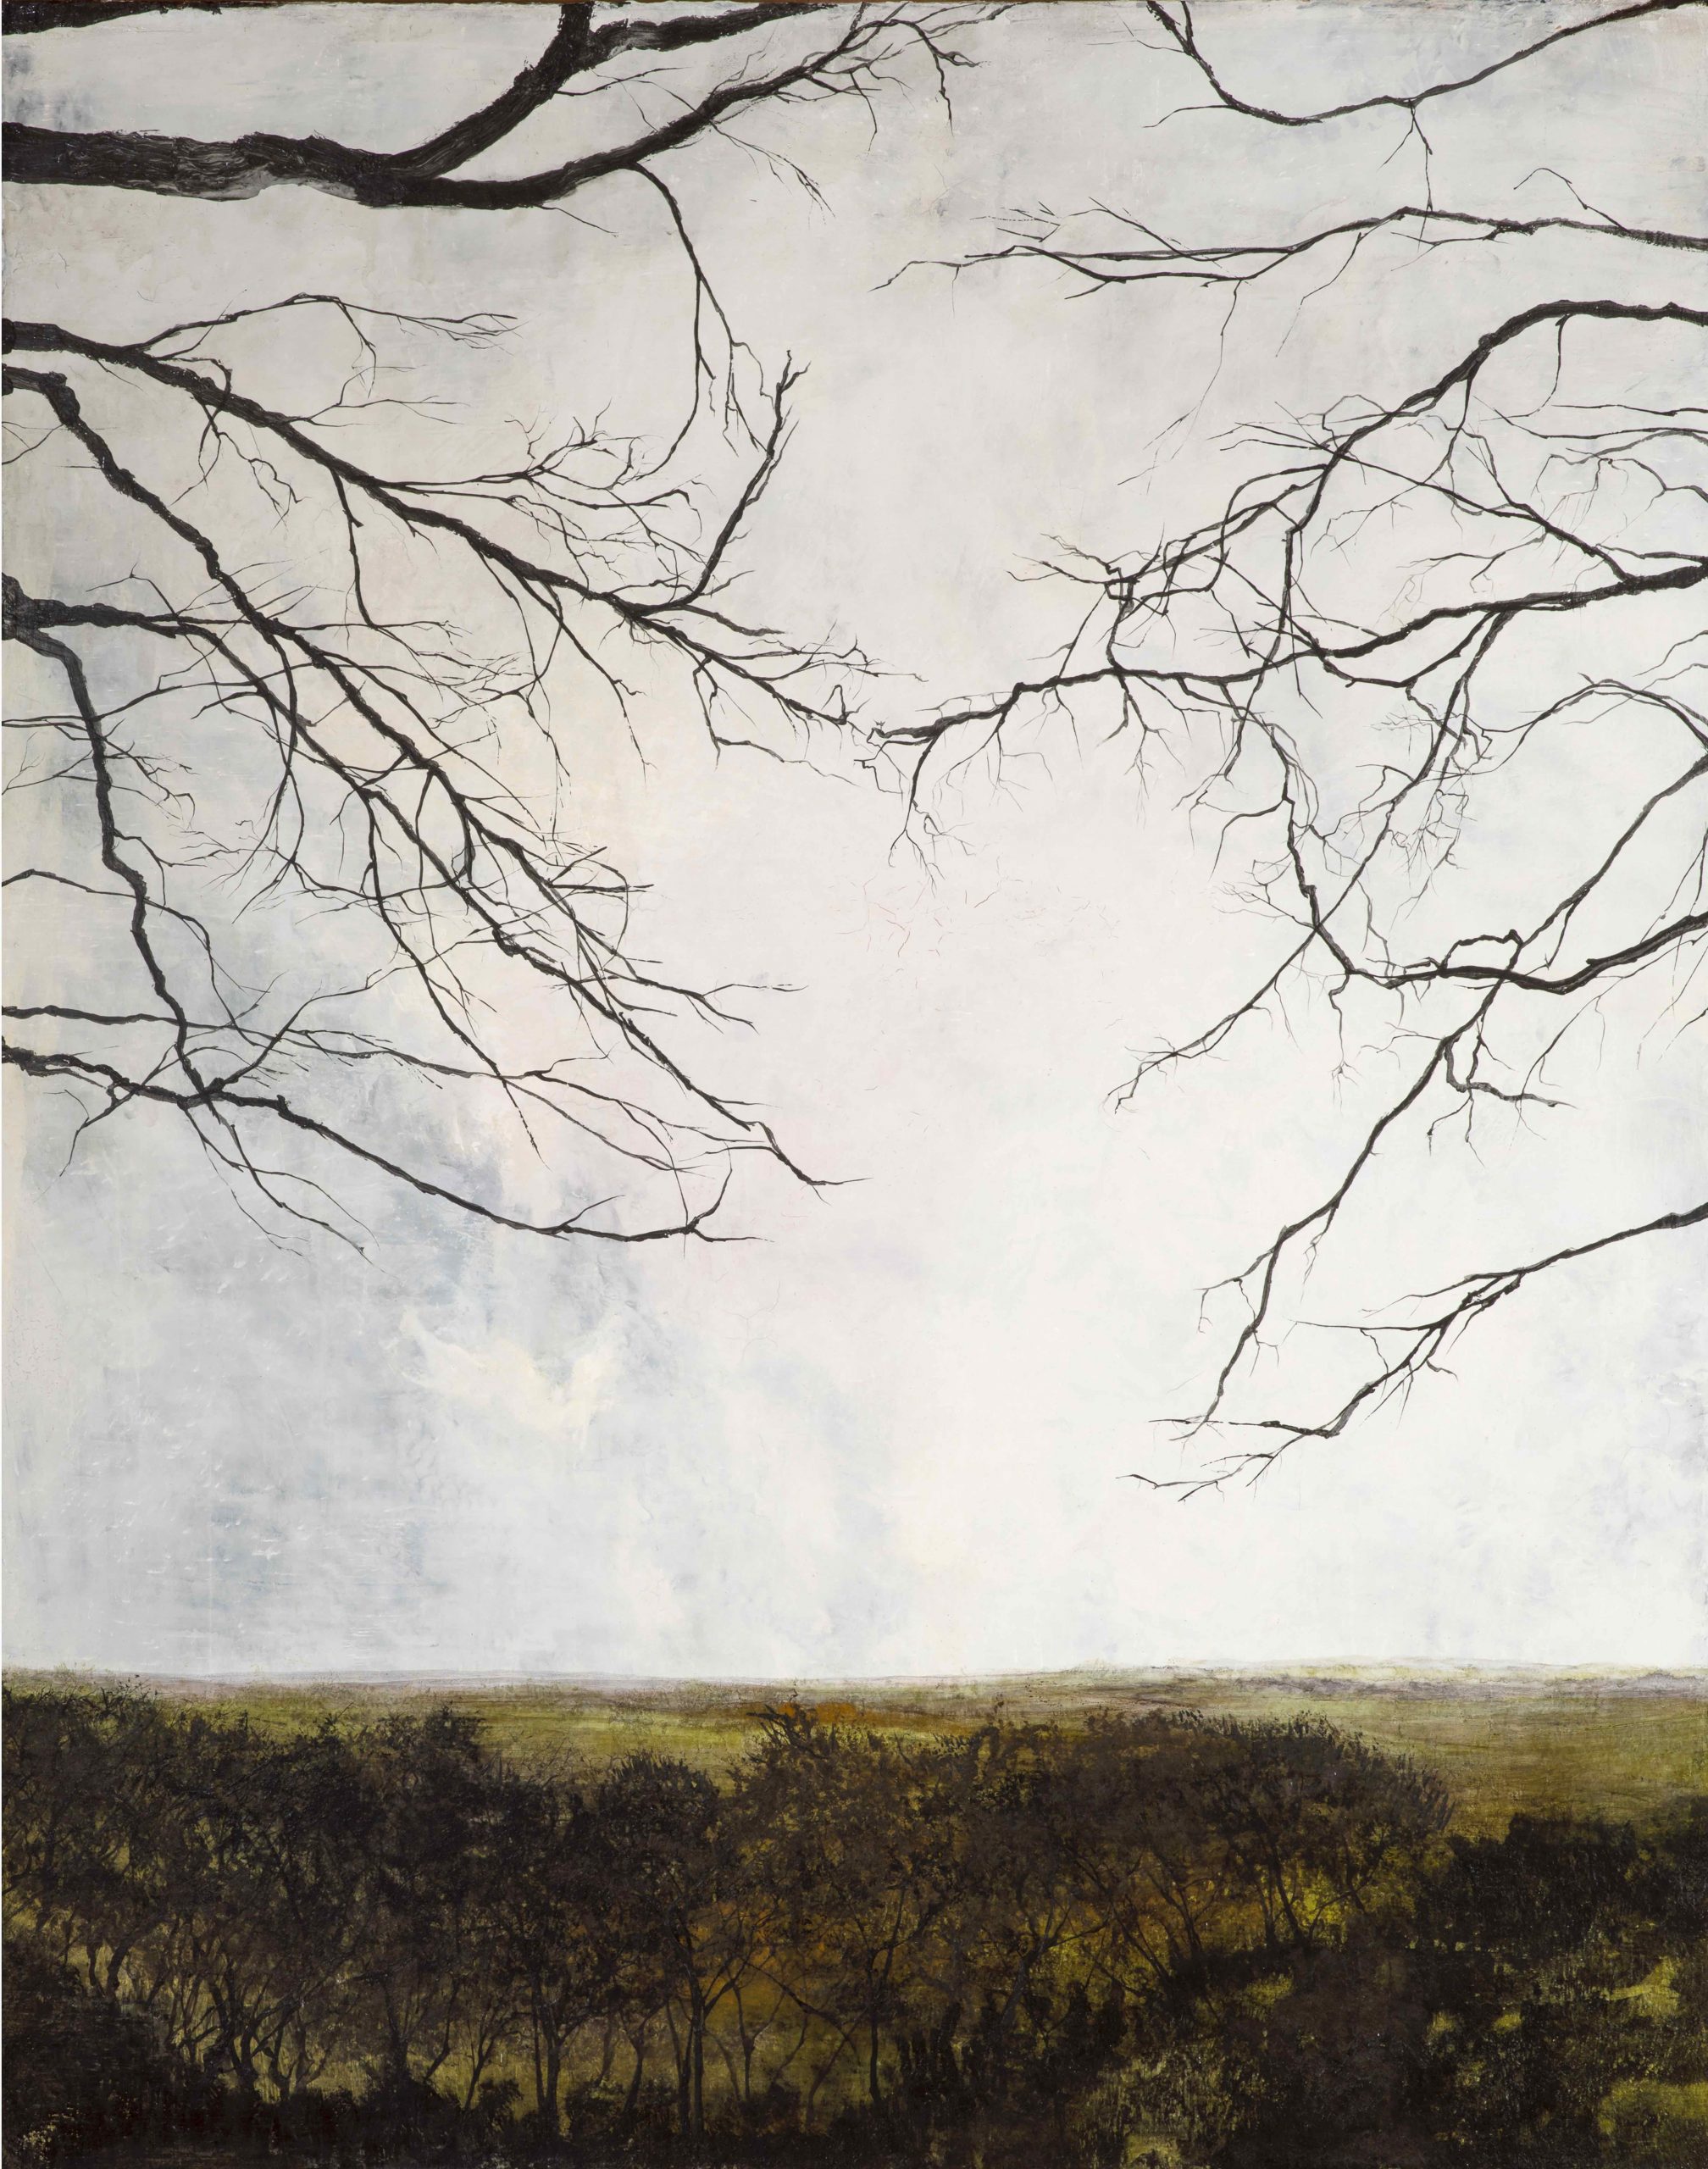 A painting of bare branches and grass in the foreground.